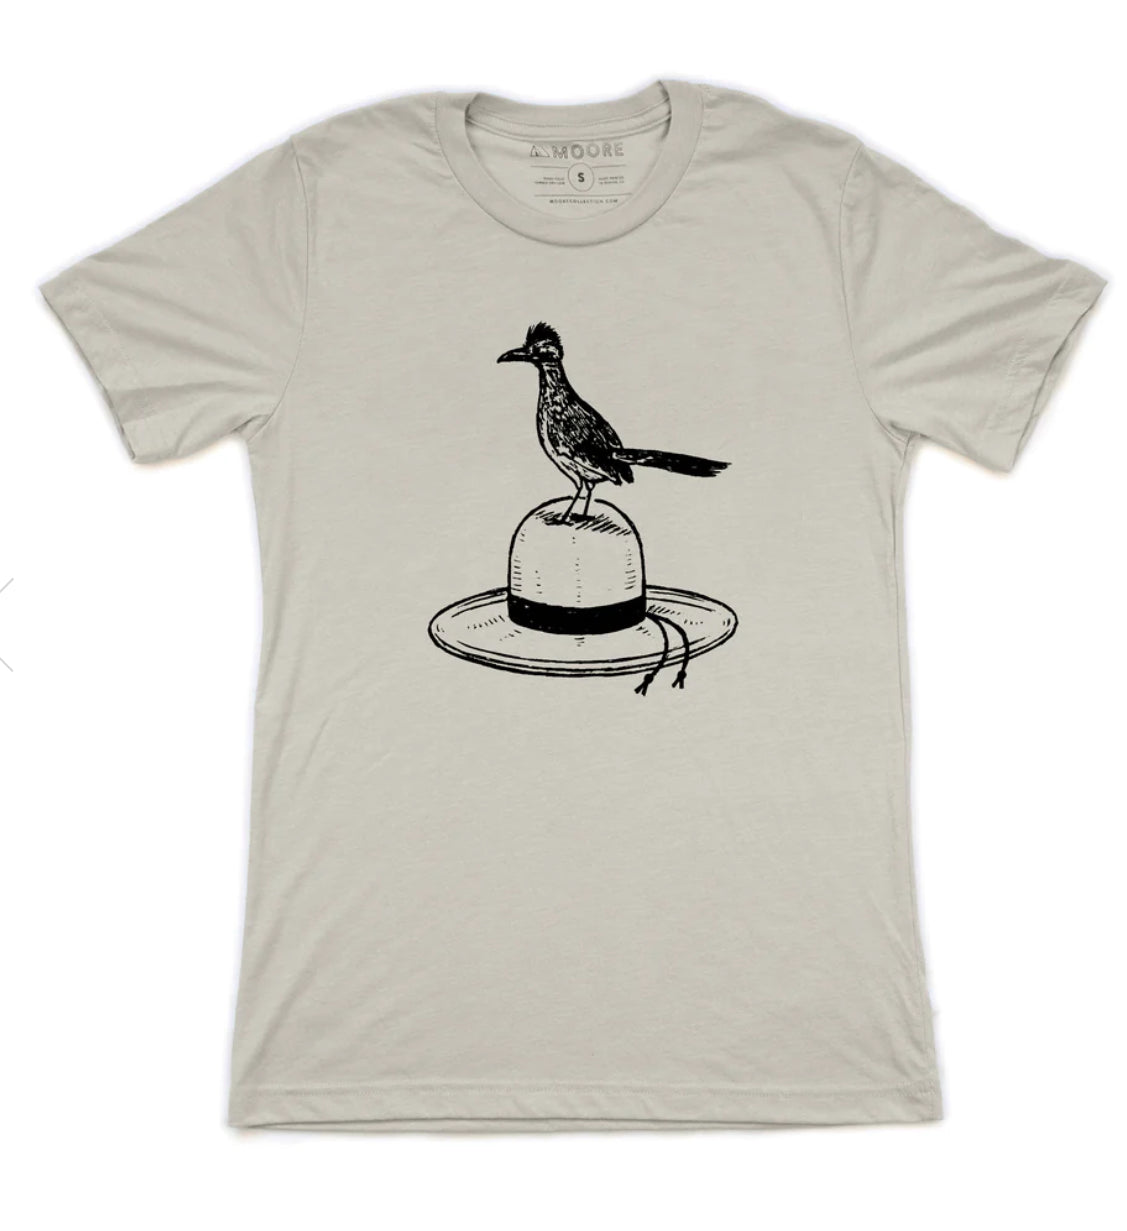 Moore Collection - Road Runner Tee